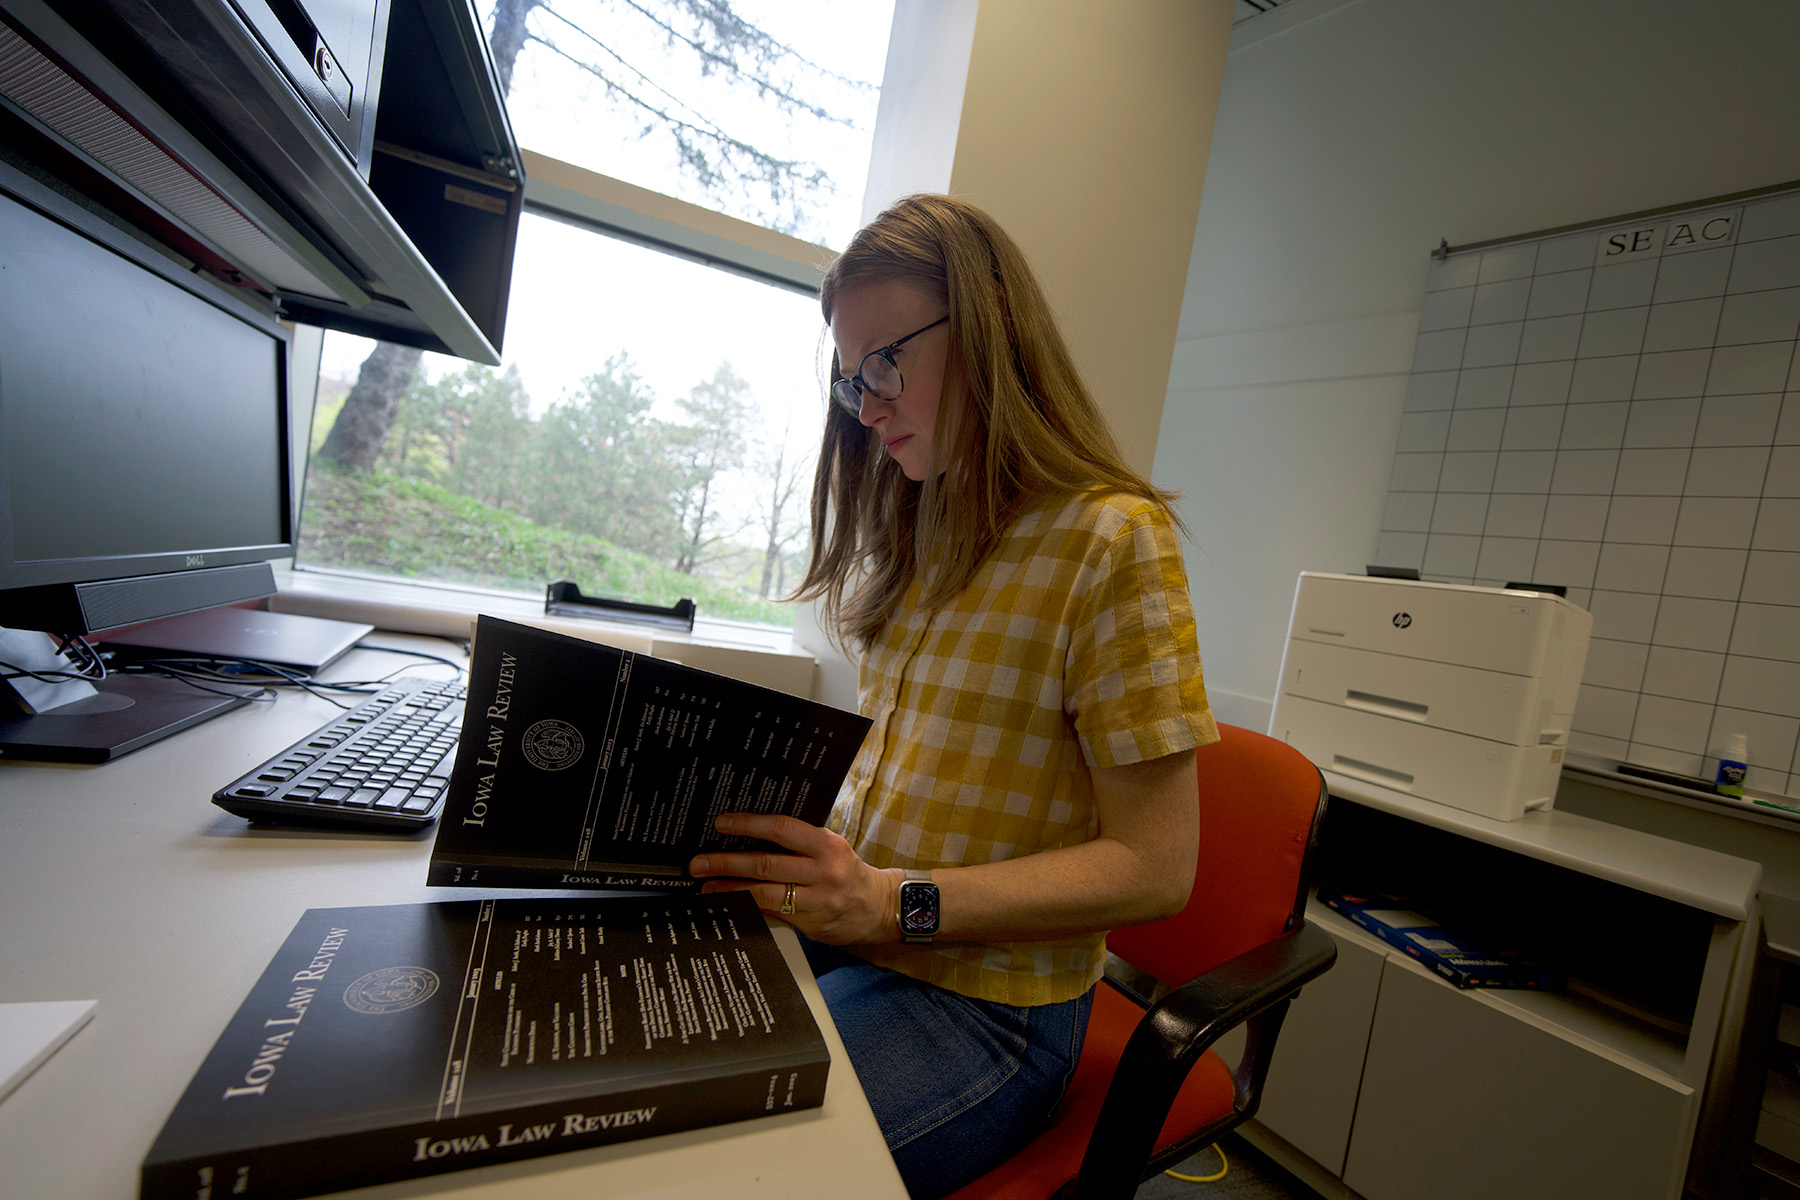 University of Iowa law grad Kate Conlow looking through an issue of Iowa Law Review, a journal on which she served as editor in chief